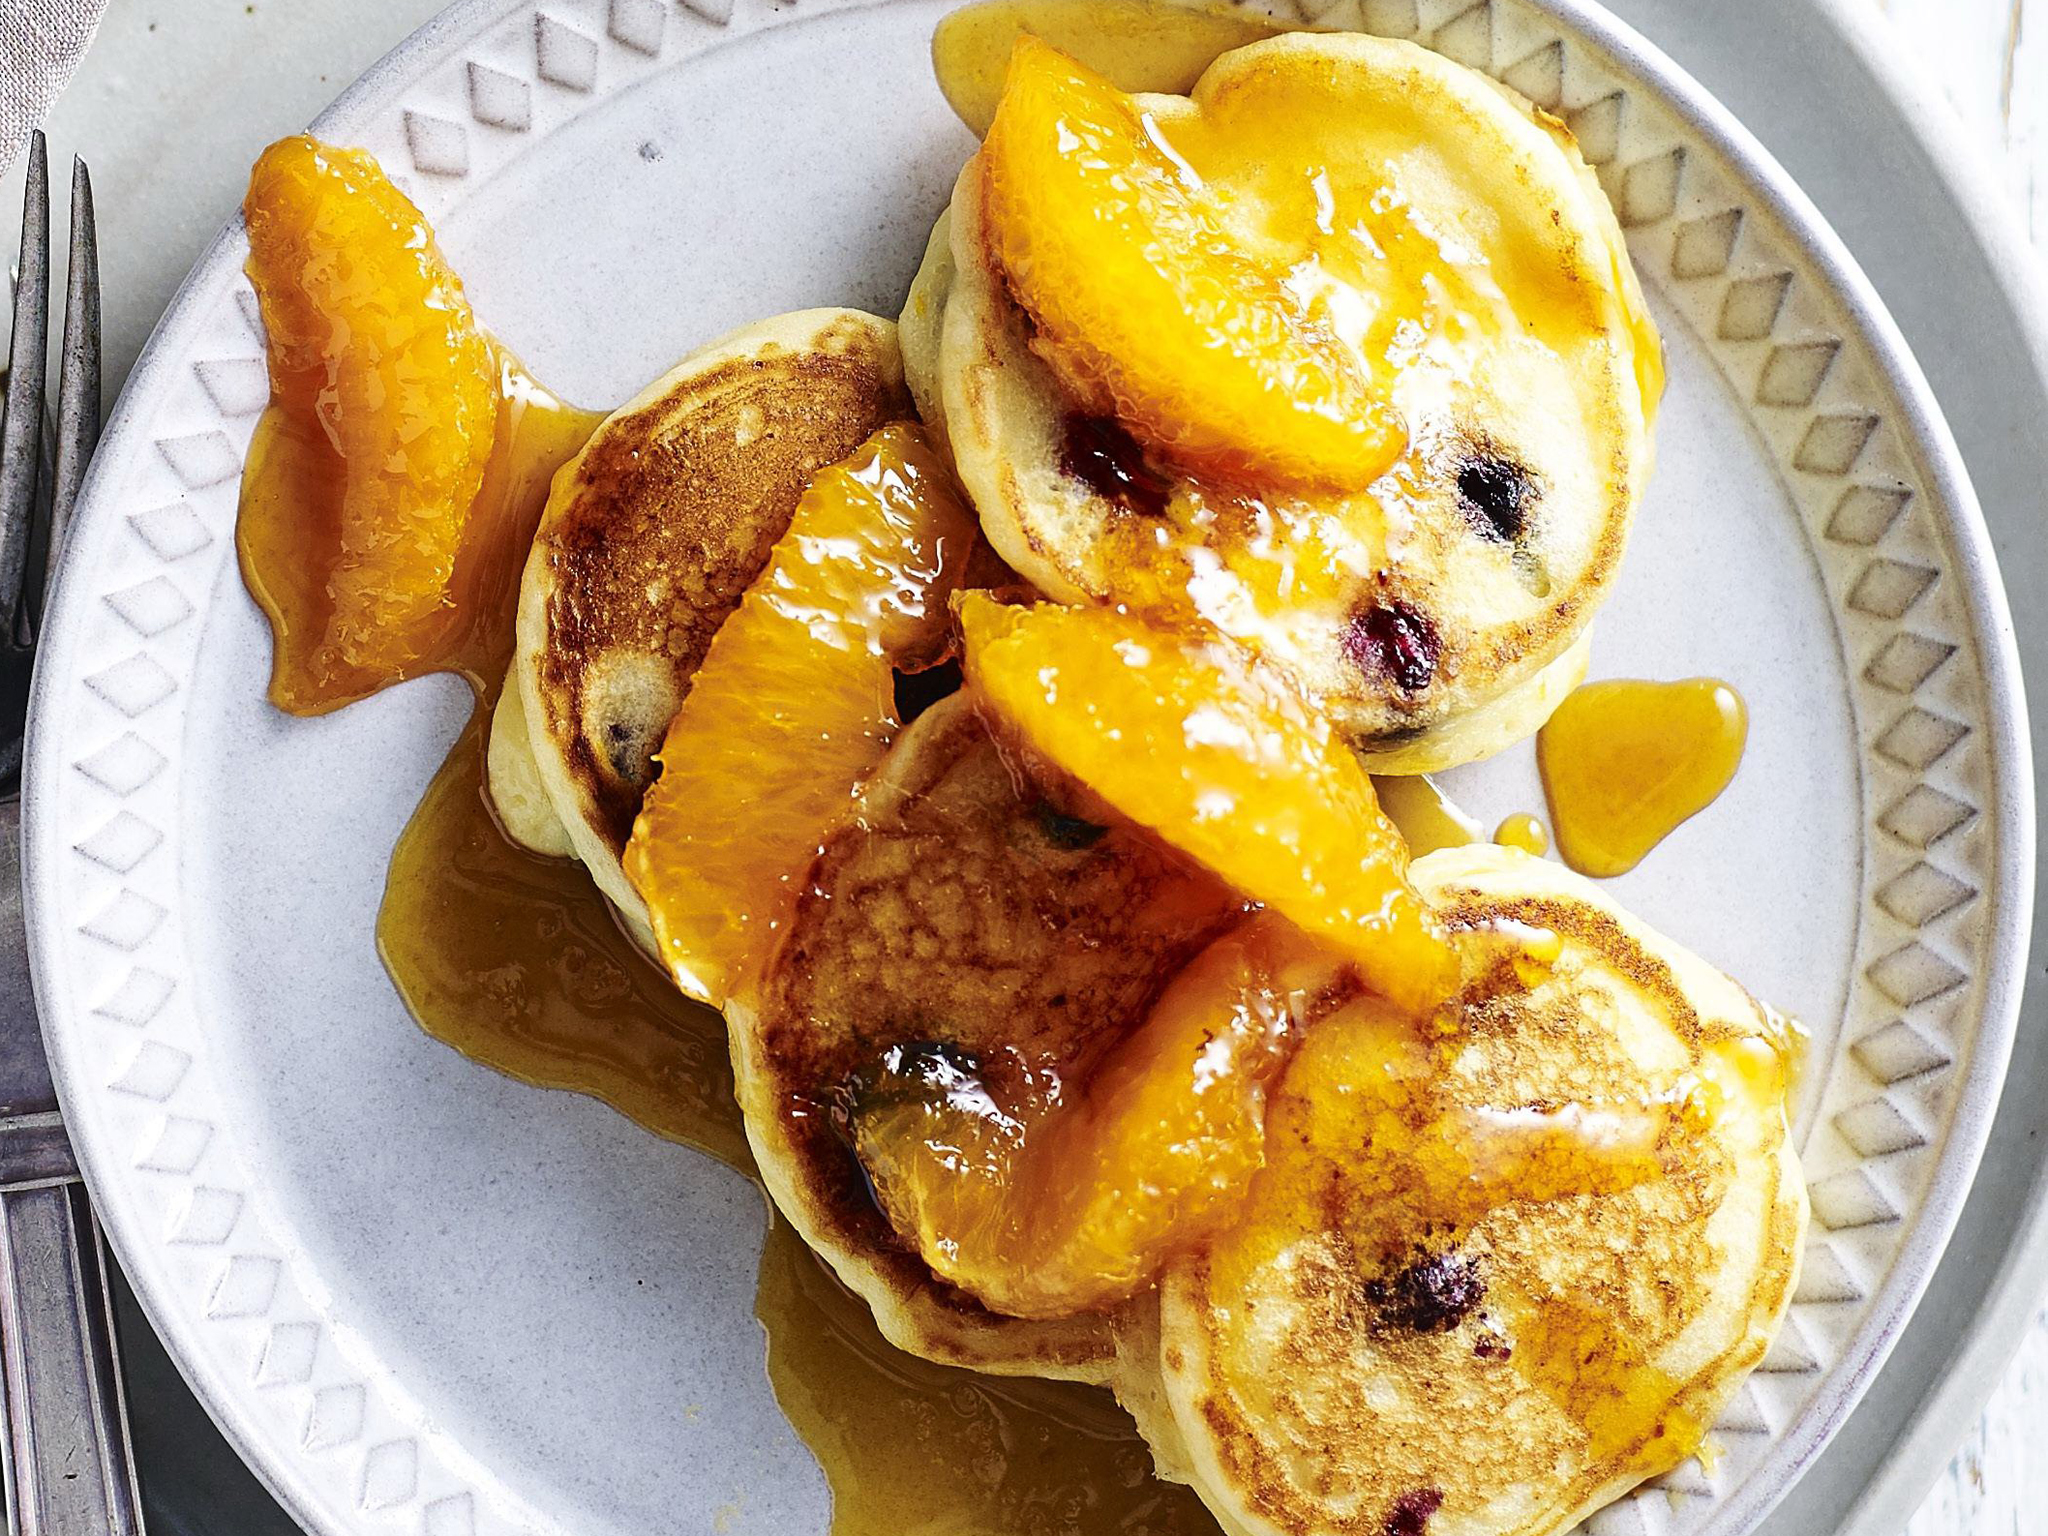 BLUEBERRY RICOTTA PIKELETS WITH CARAMELISED ORANGES